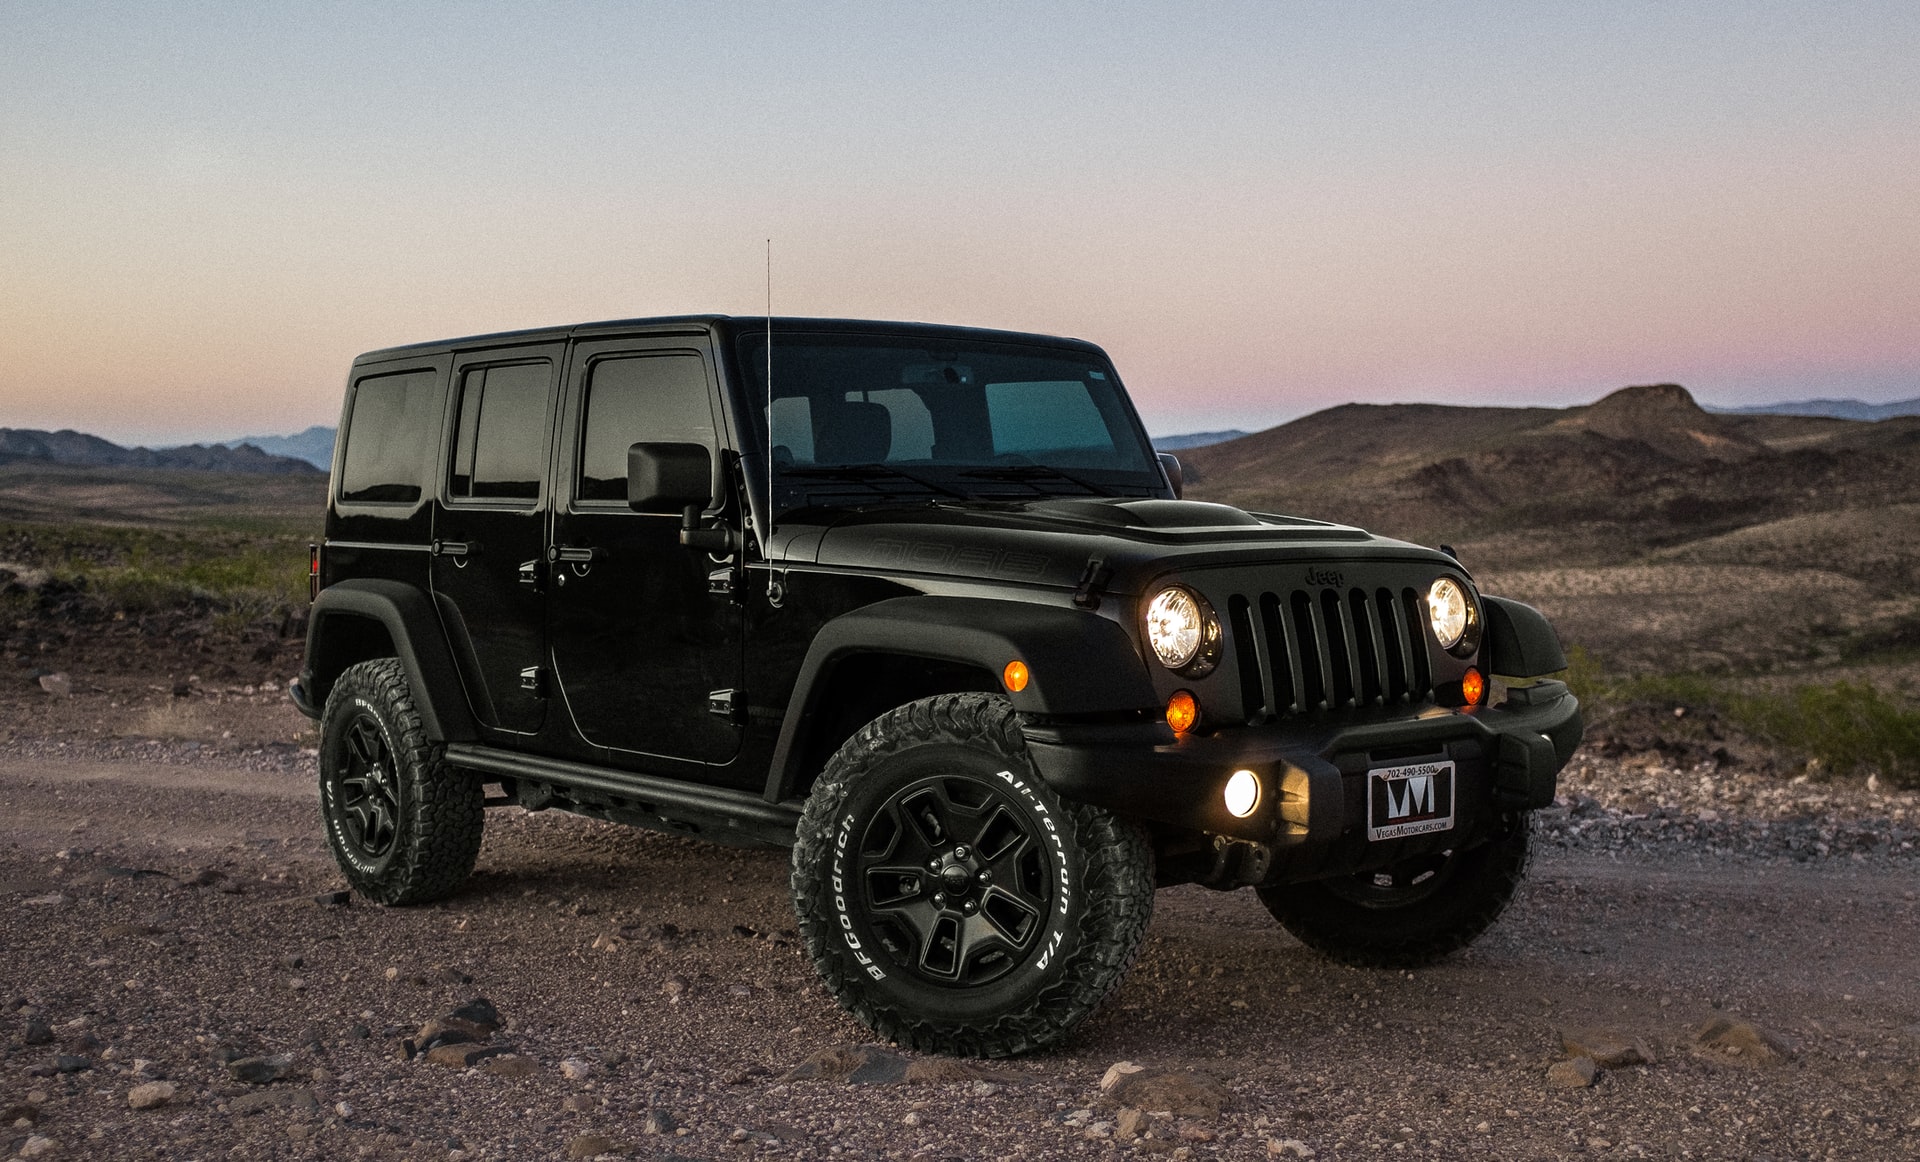 10. Wrap-up: Final Thoughts on whether a Mountain Bike will Fit in a Jeep Wrangler.